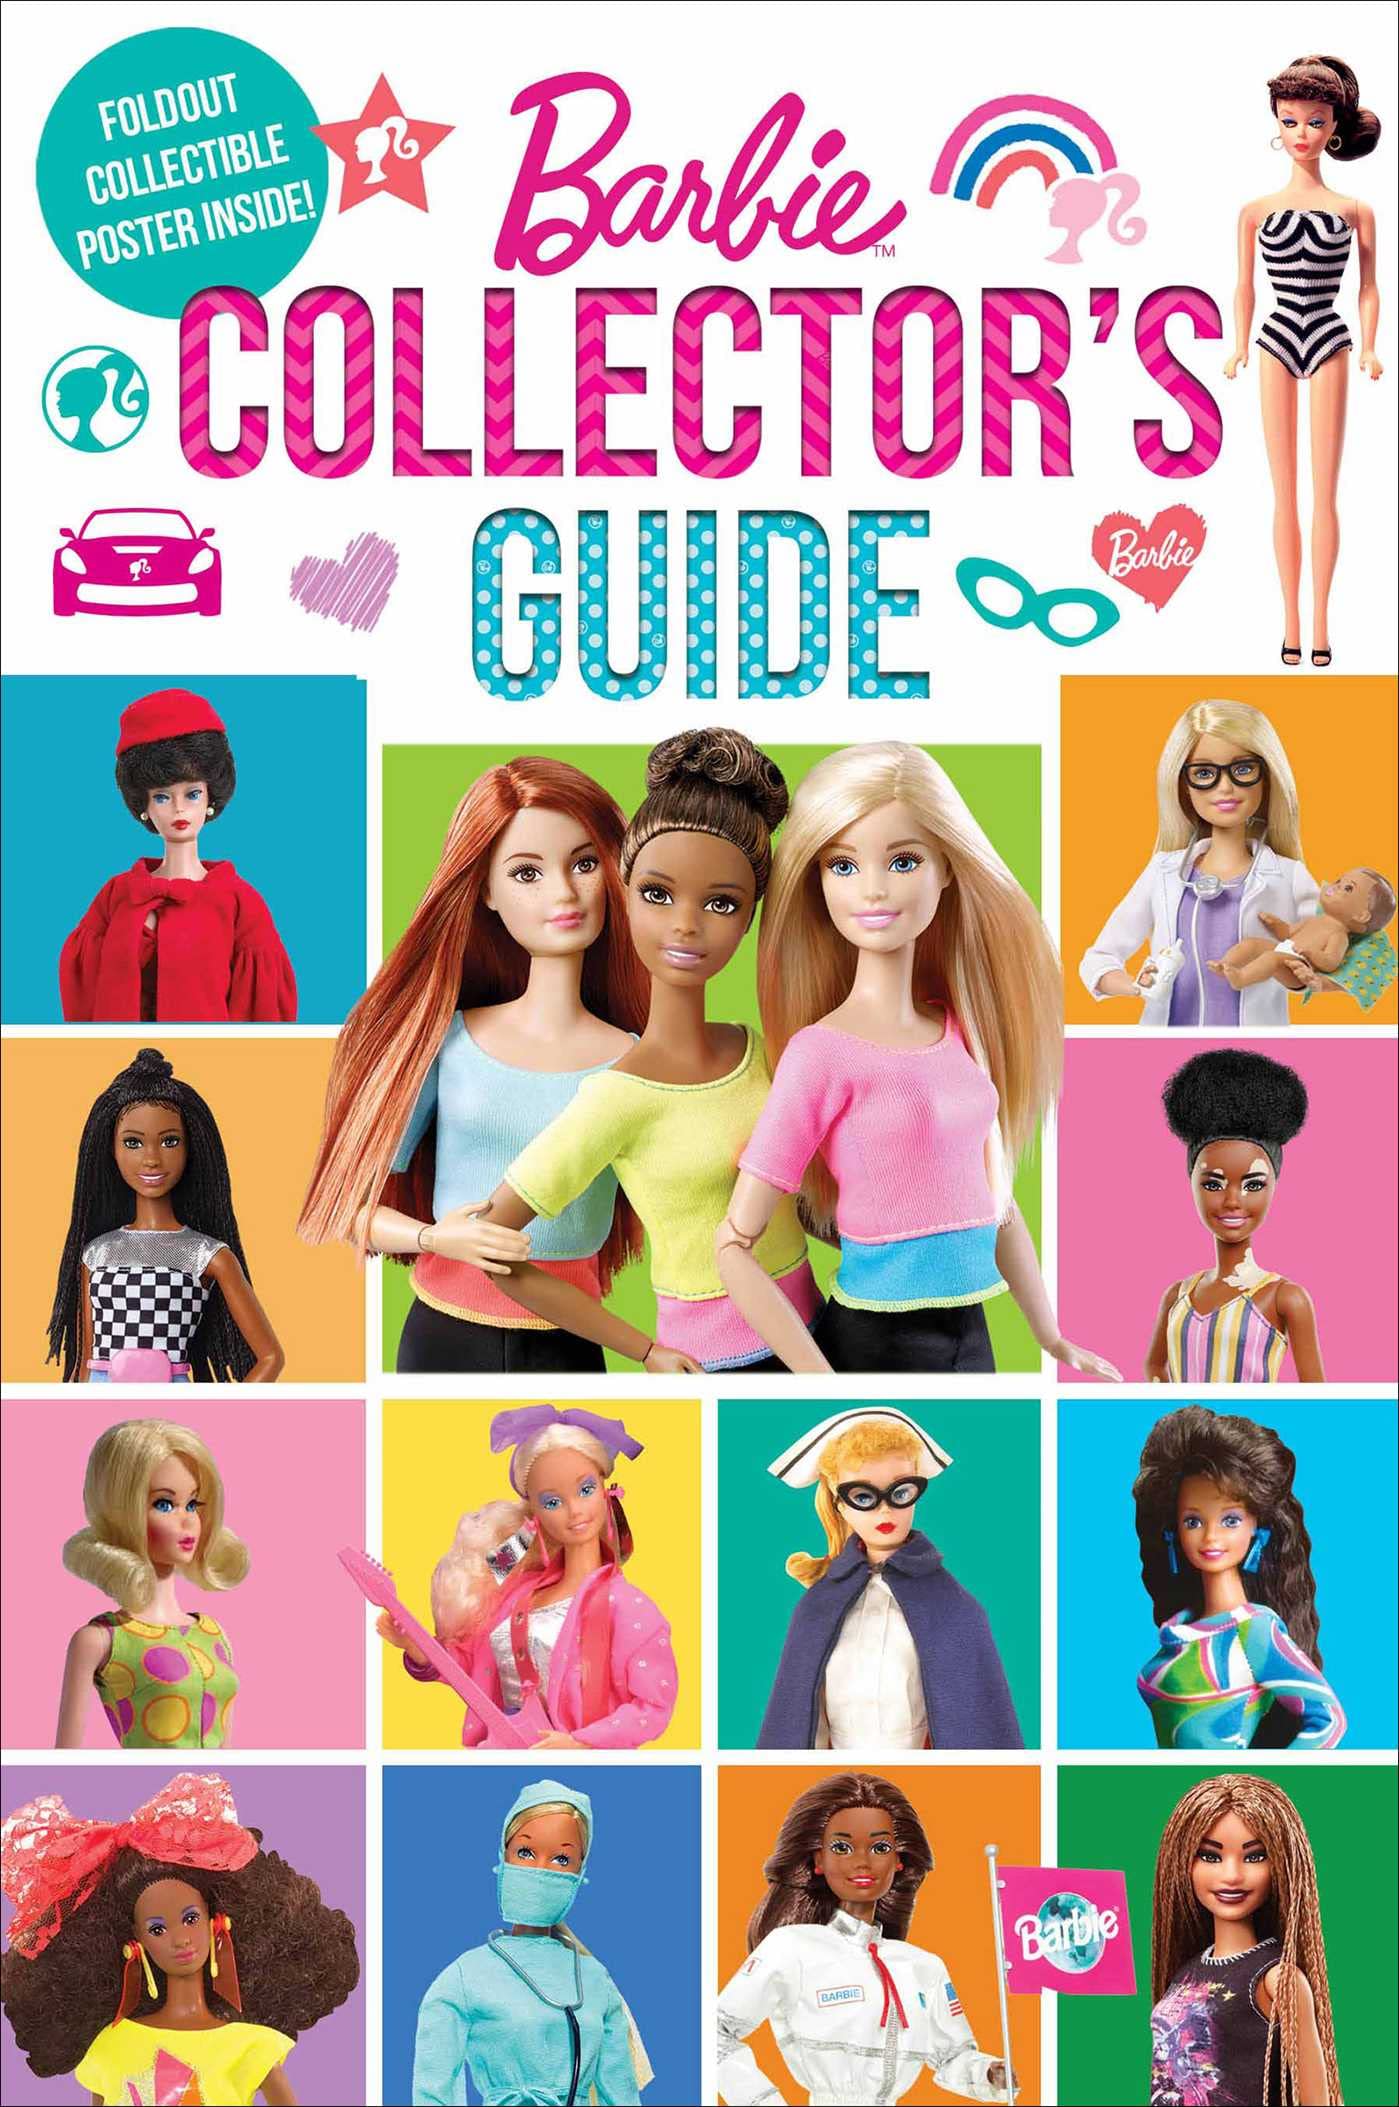 Image for "Barbie Collector's Guide"